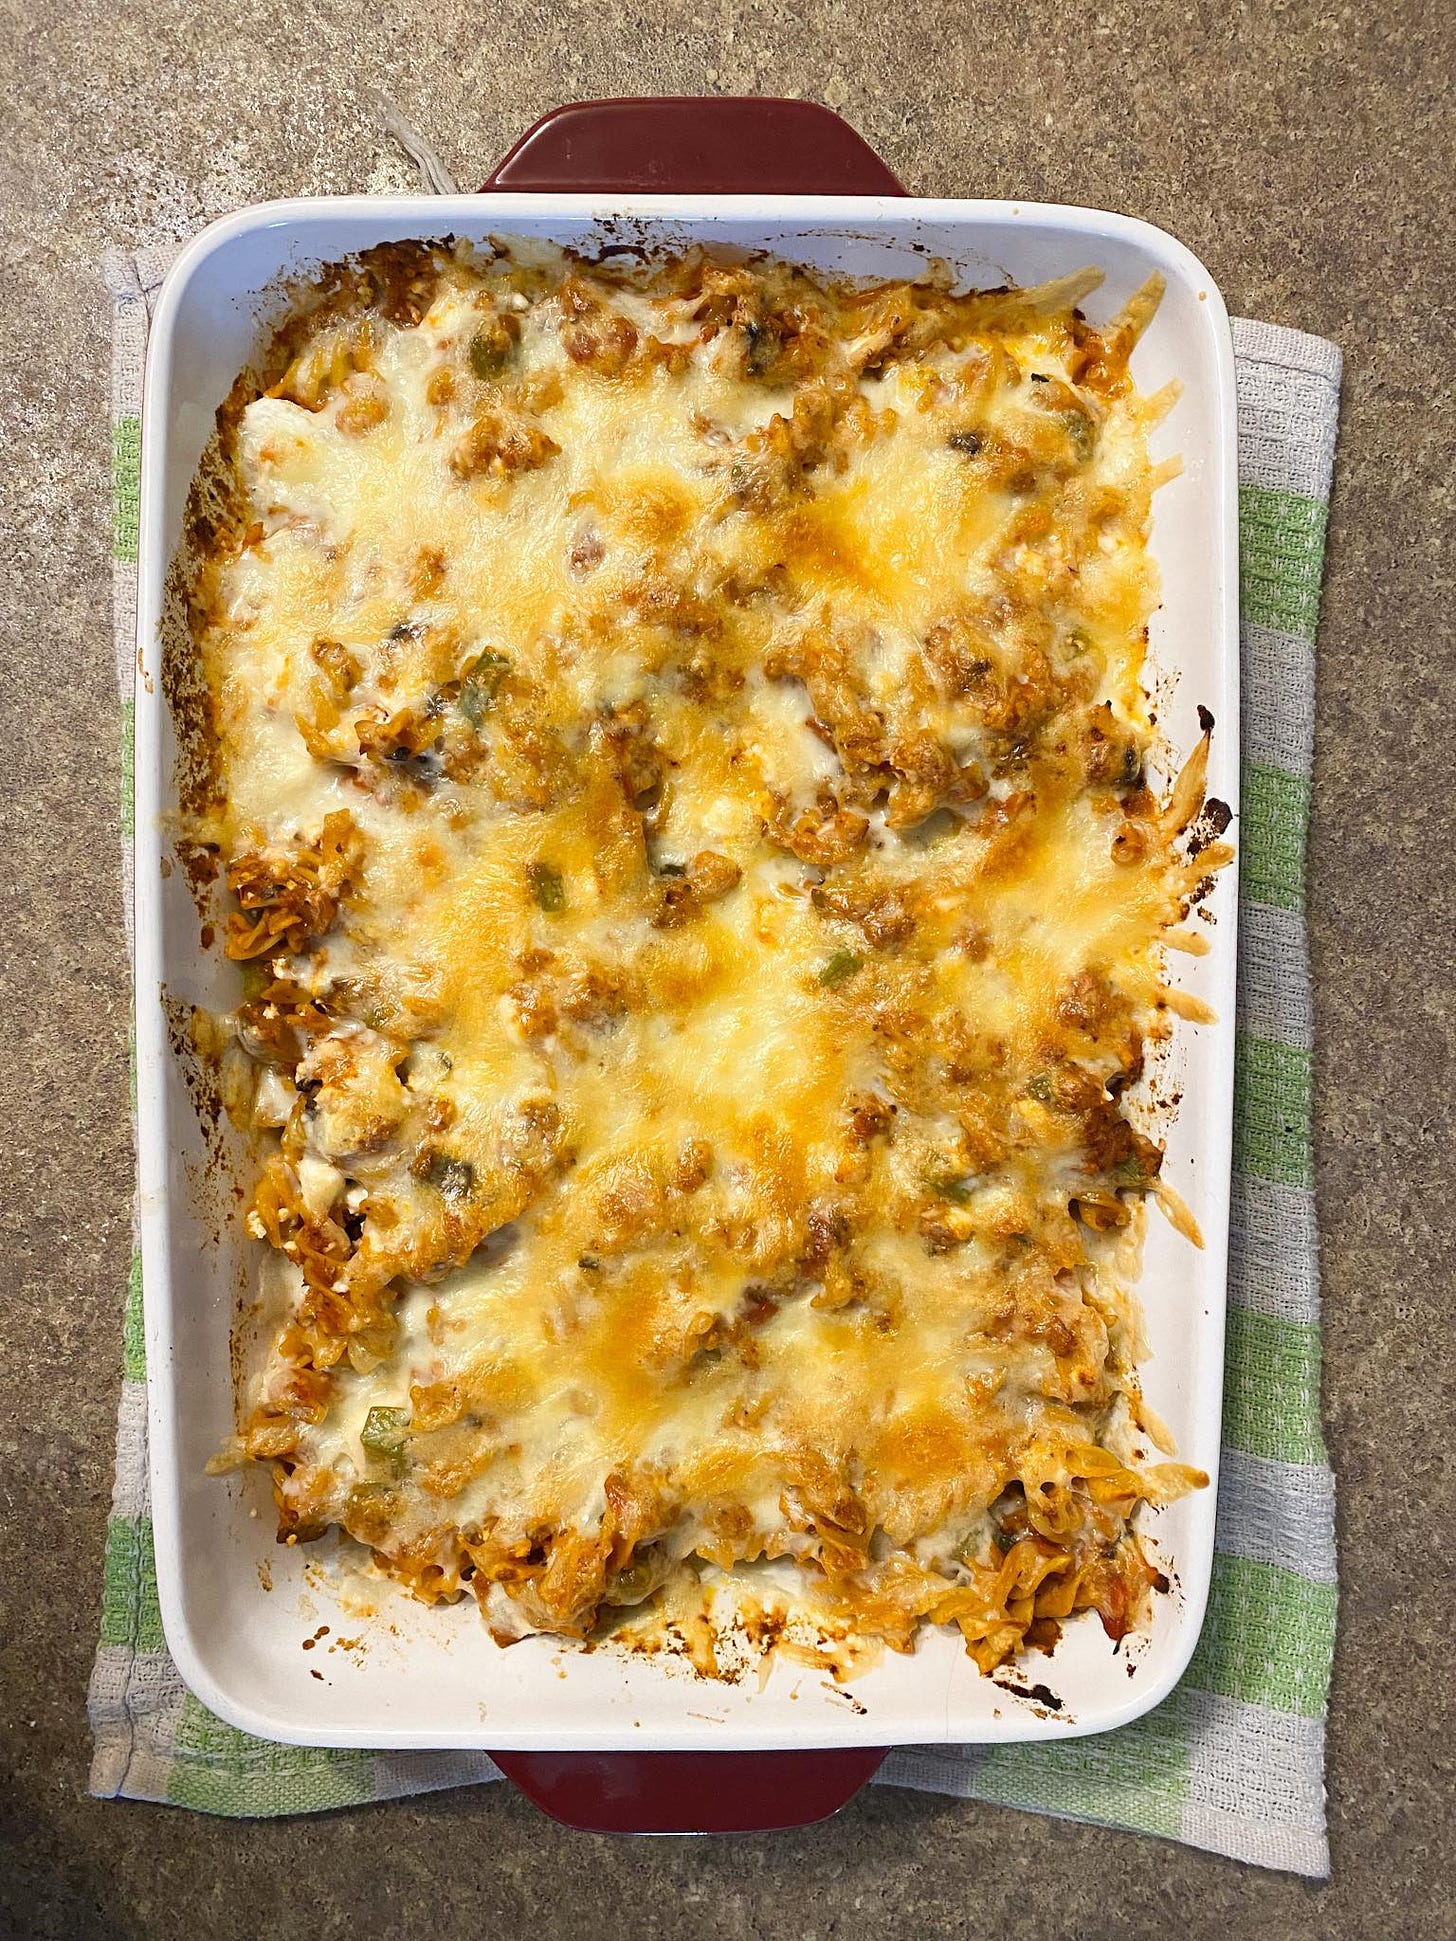 pasta in a casserole dish, the cheese golden from being broiled